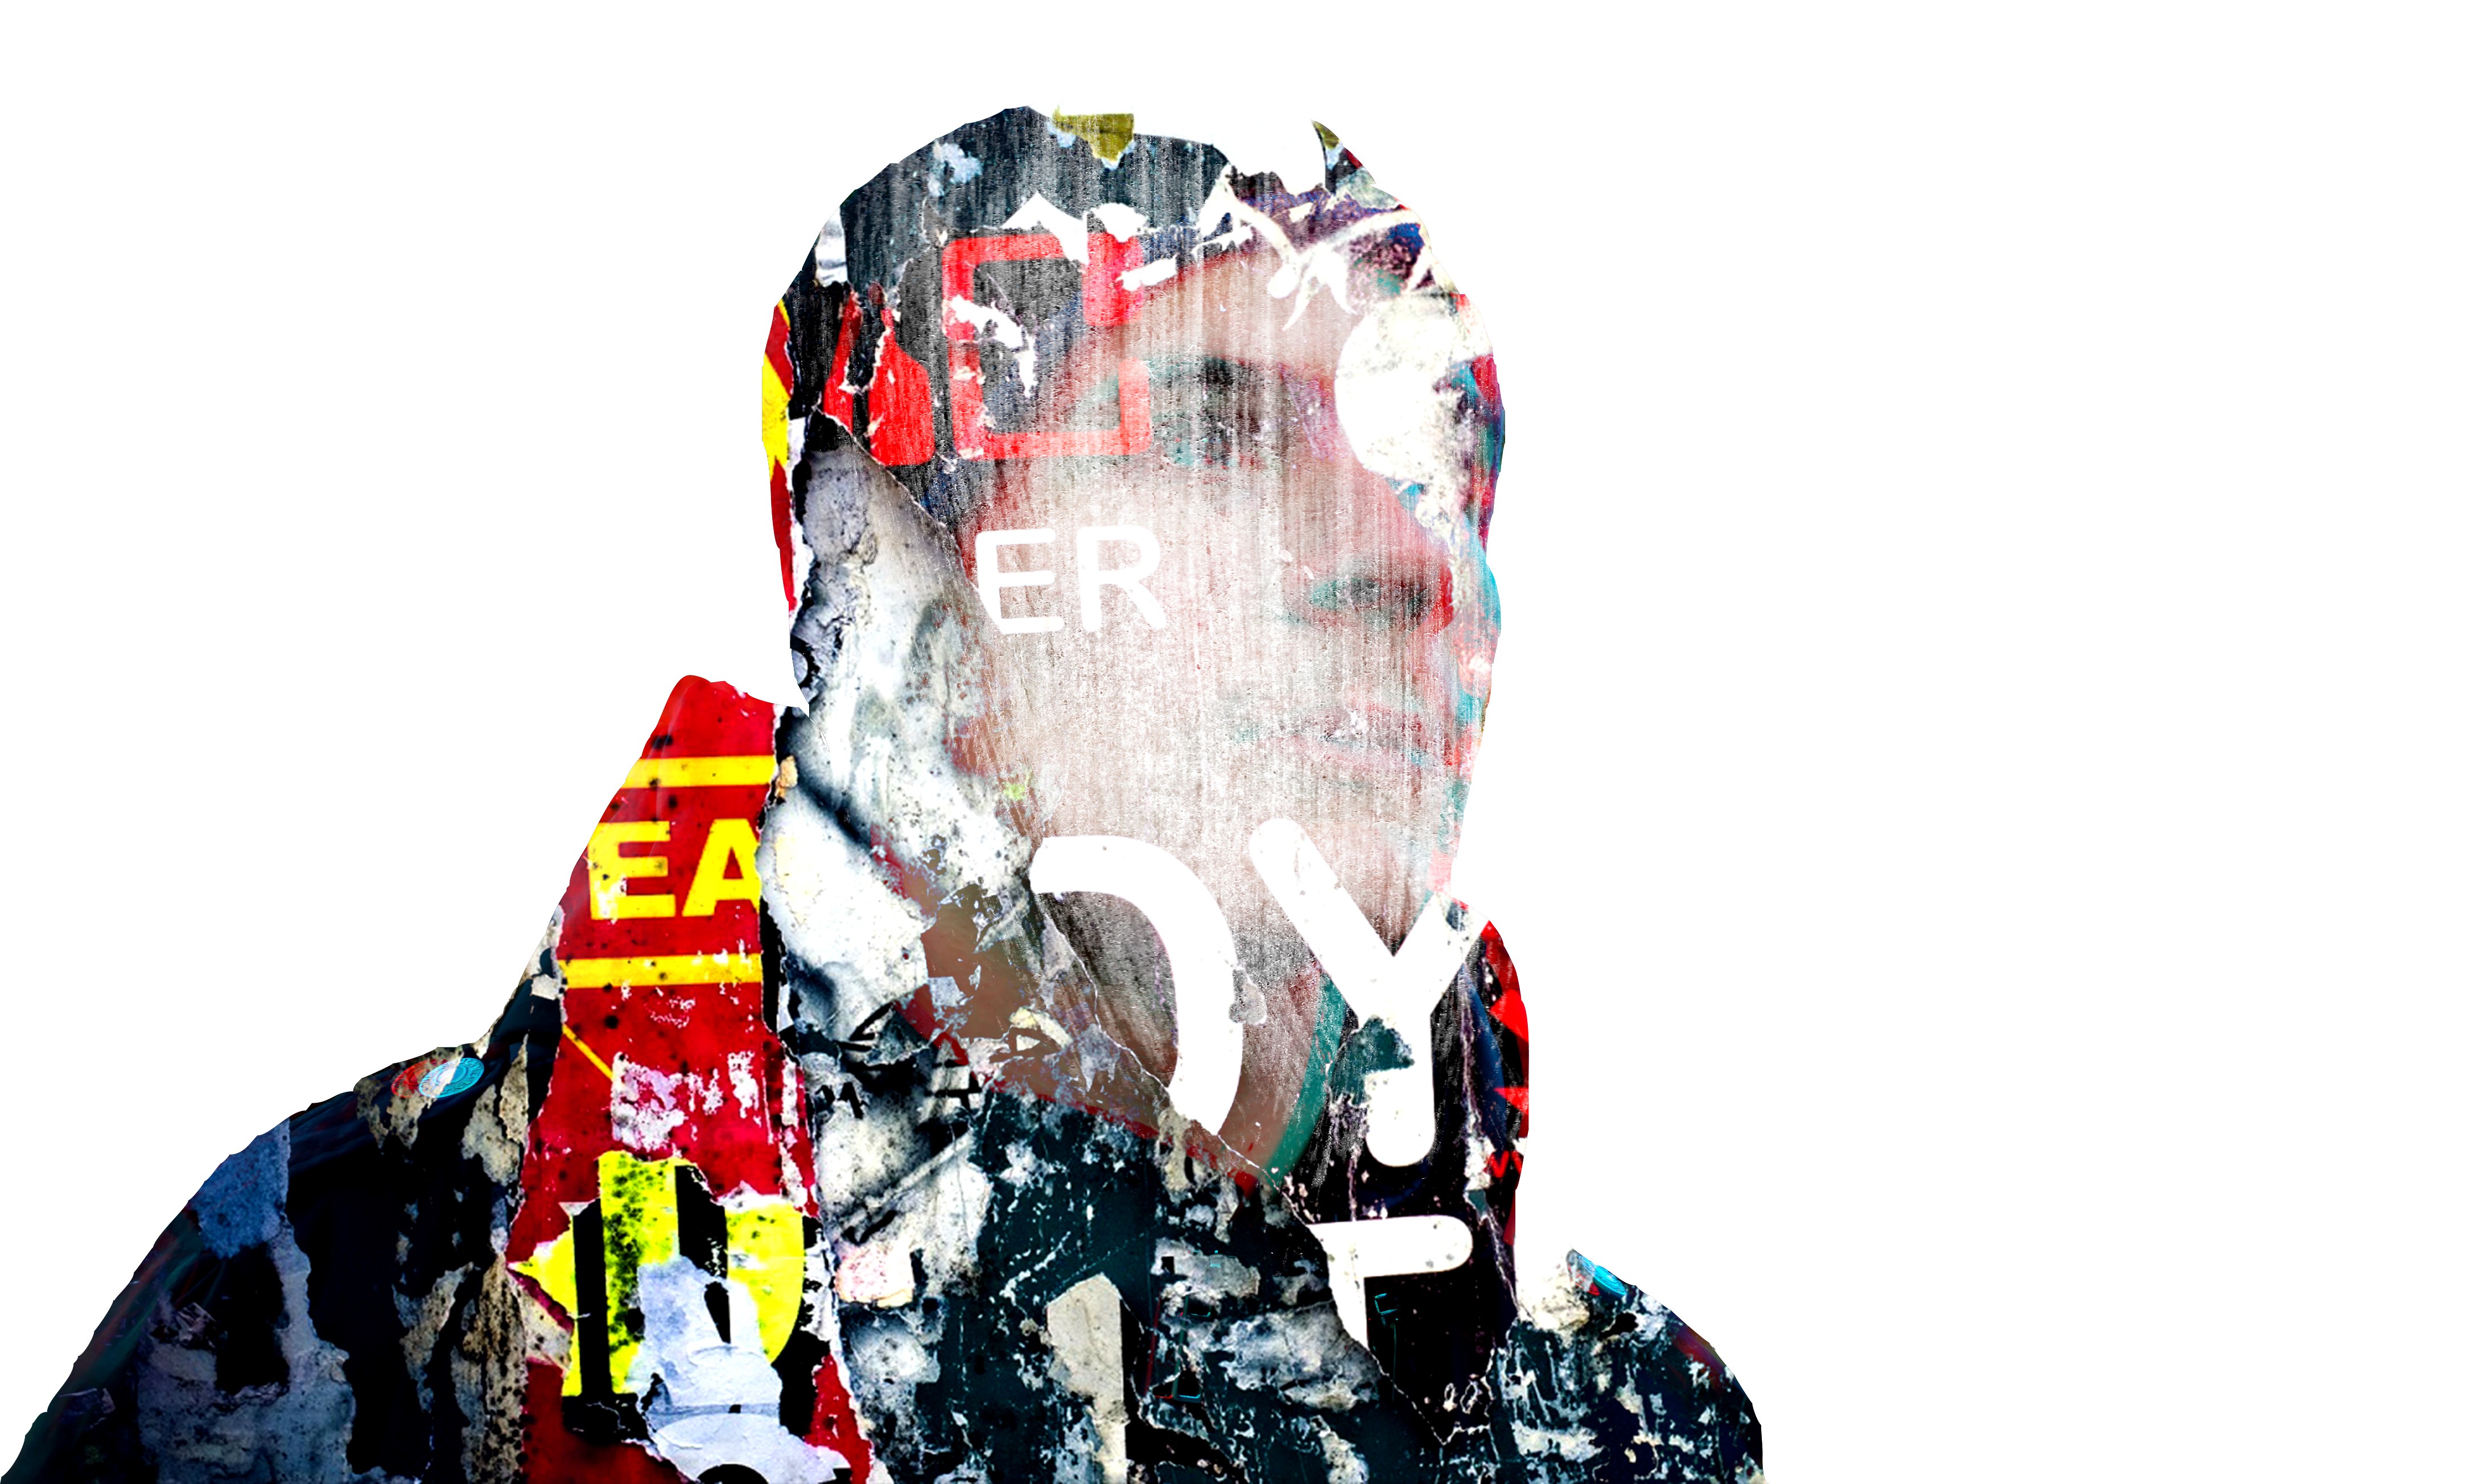 people, Photoshopped, Double Exposure, 3D, Street Art, Red, Blue, Yellow, Paper, Graffiti Wallpaper